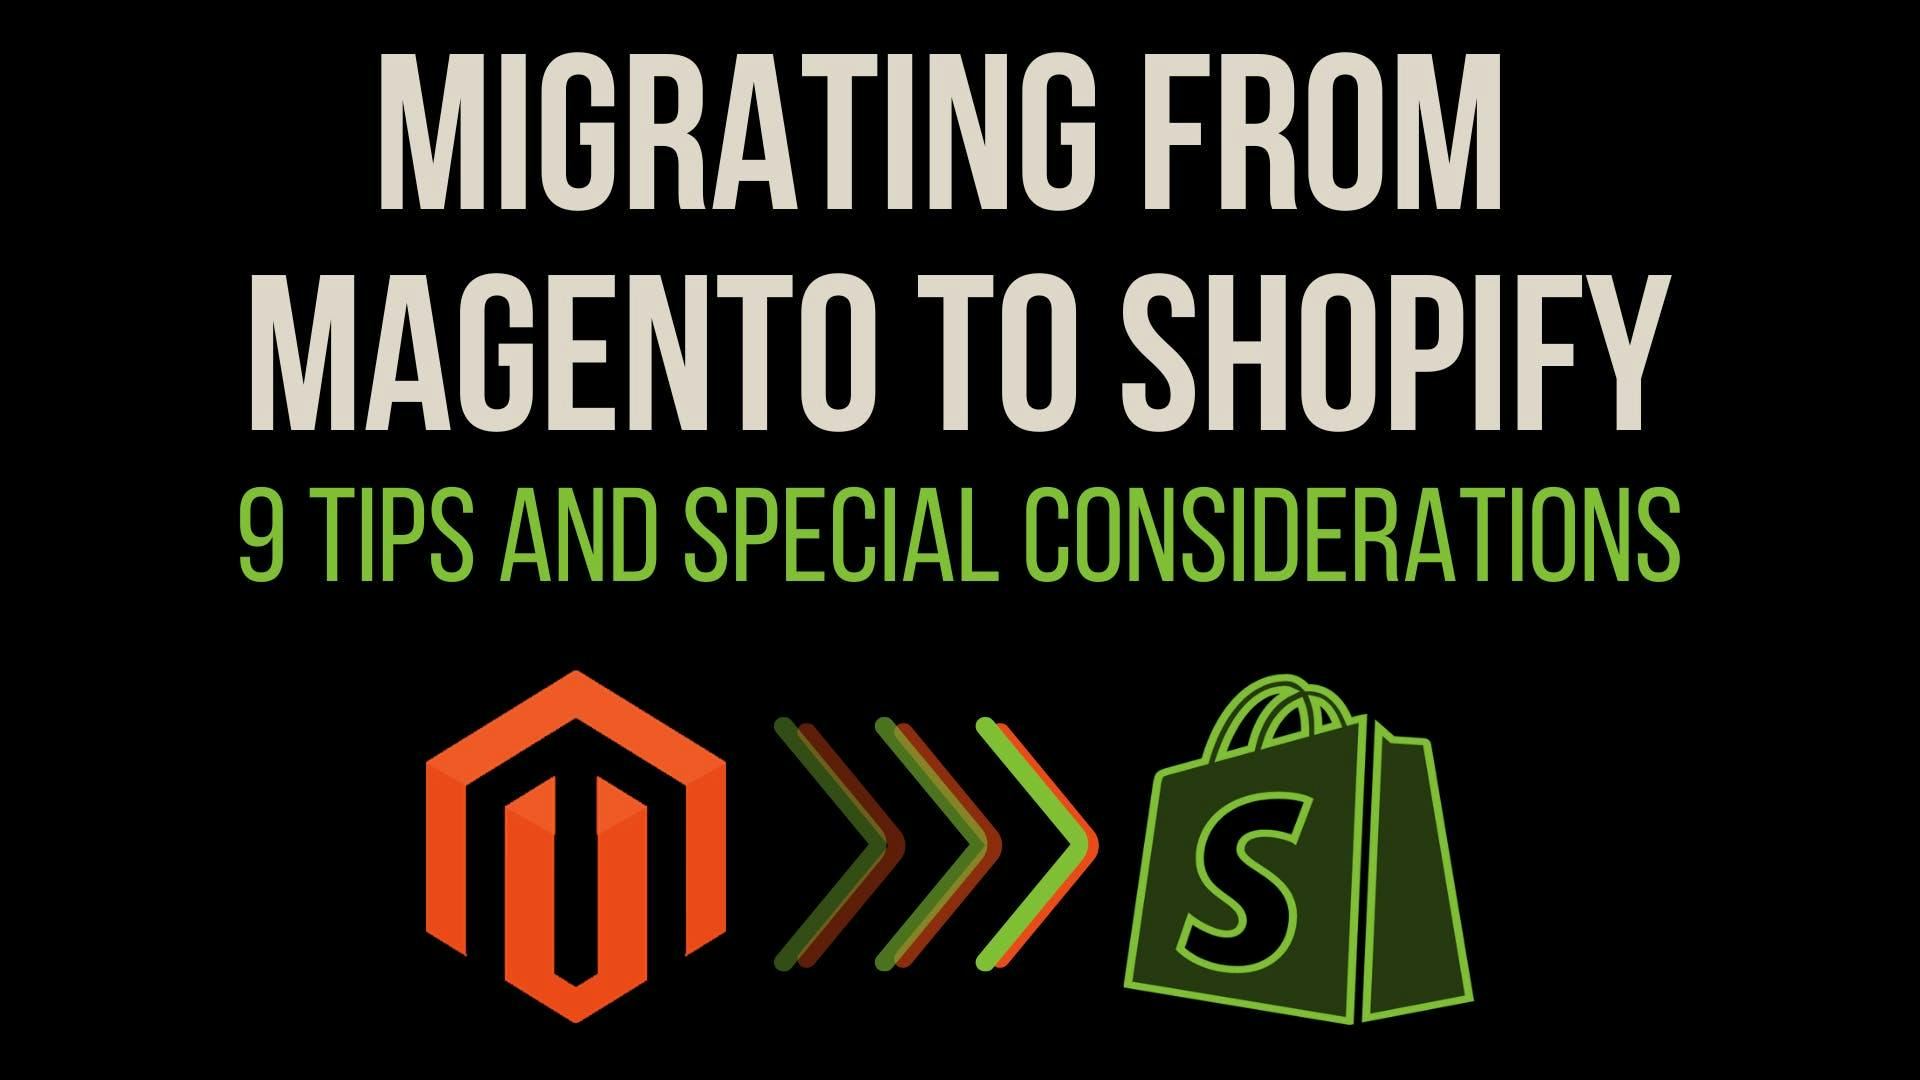 Migrating from Magento to Shopify